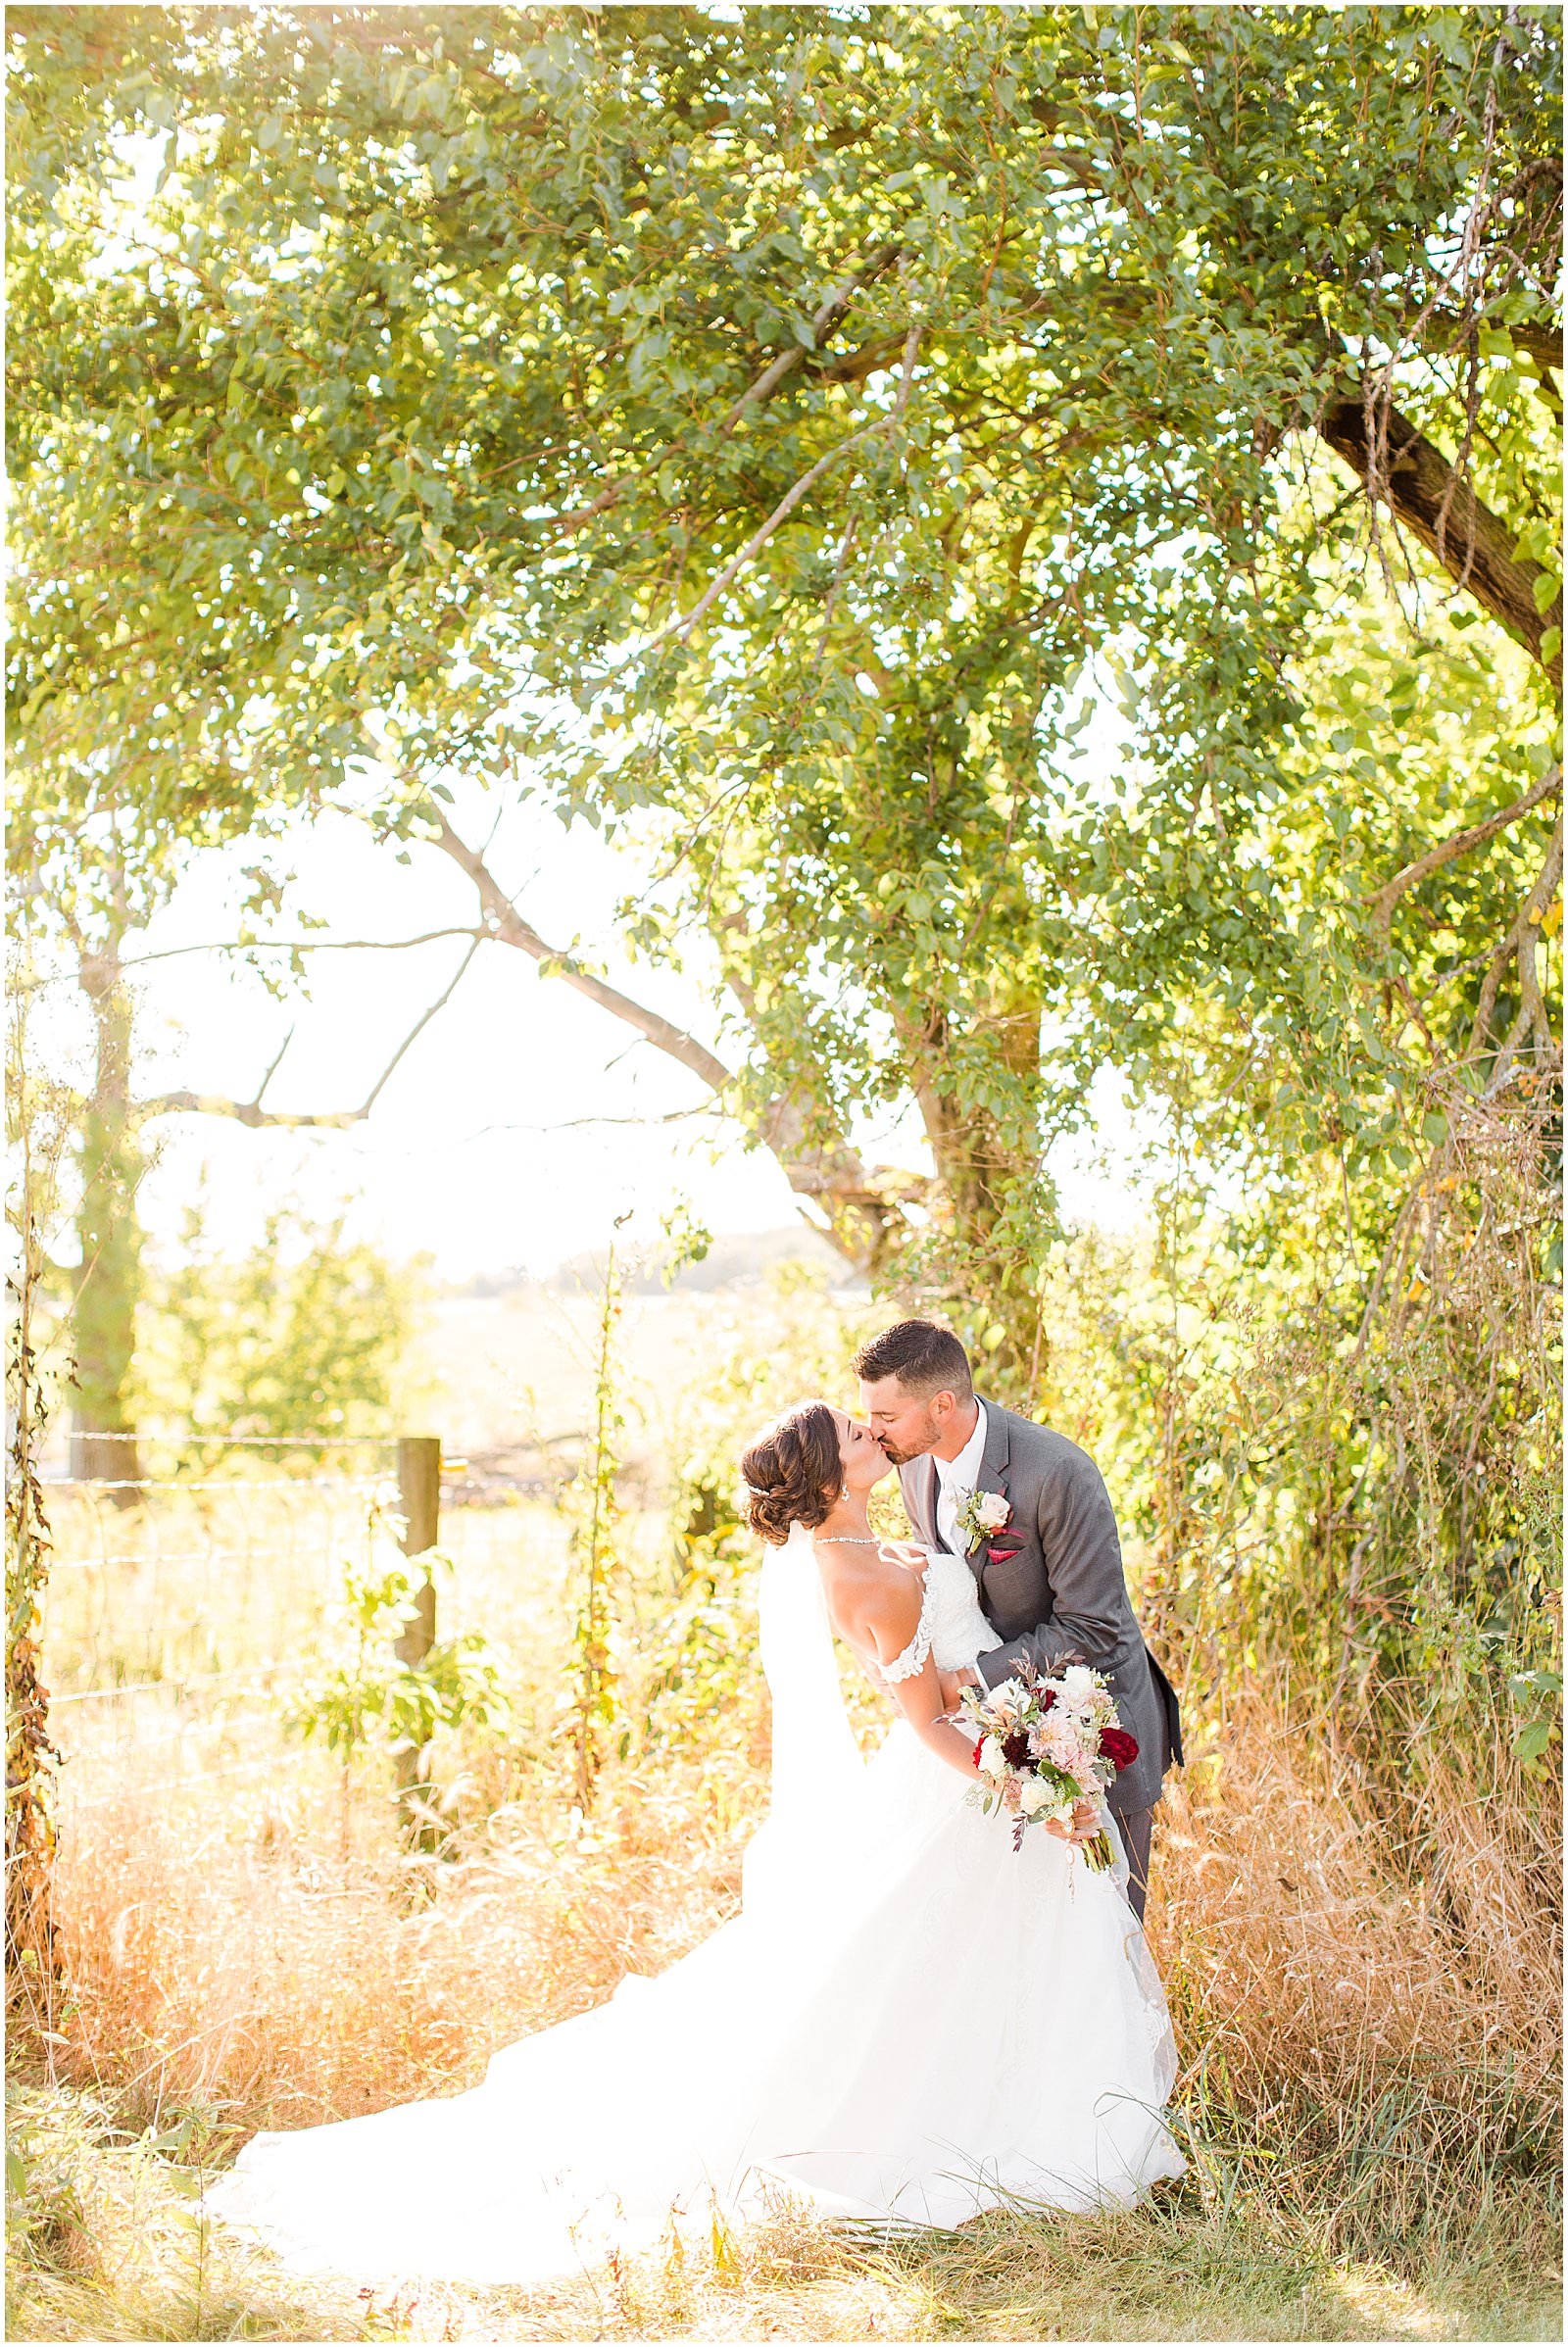 A Stunning Fall Wedding in Indianapolis, IN |. Sally and Andrew | Bret and Brandie Photography 0123.jpg